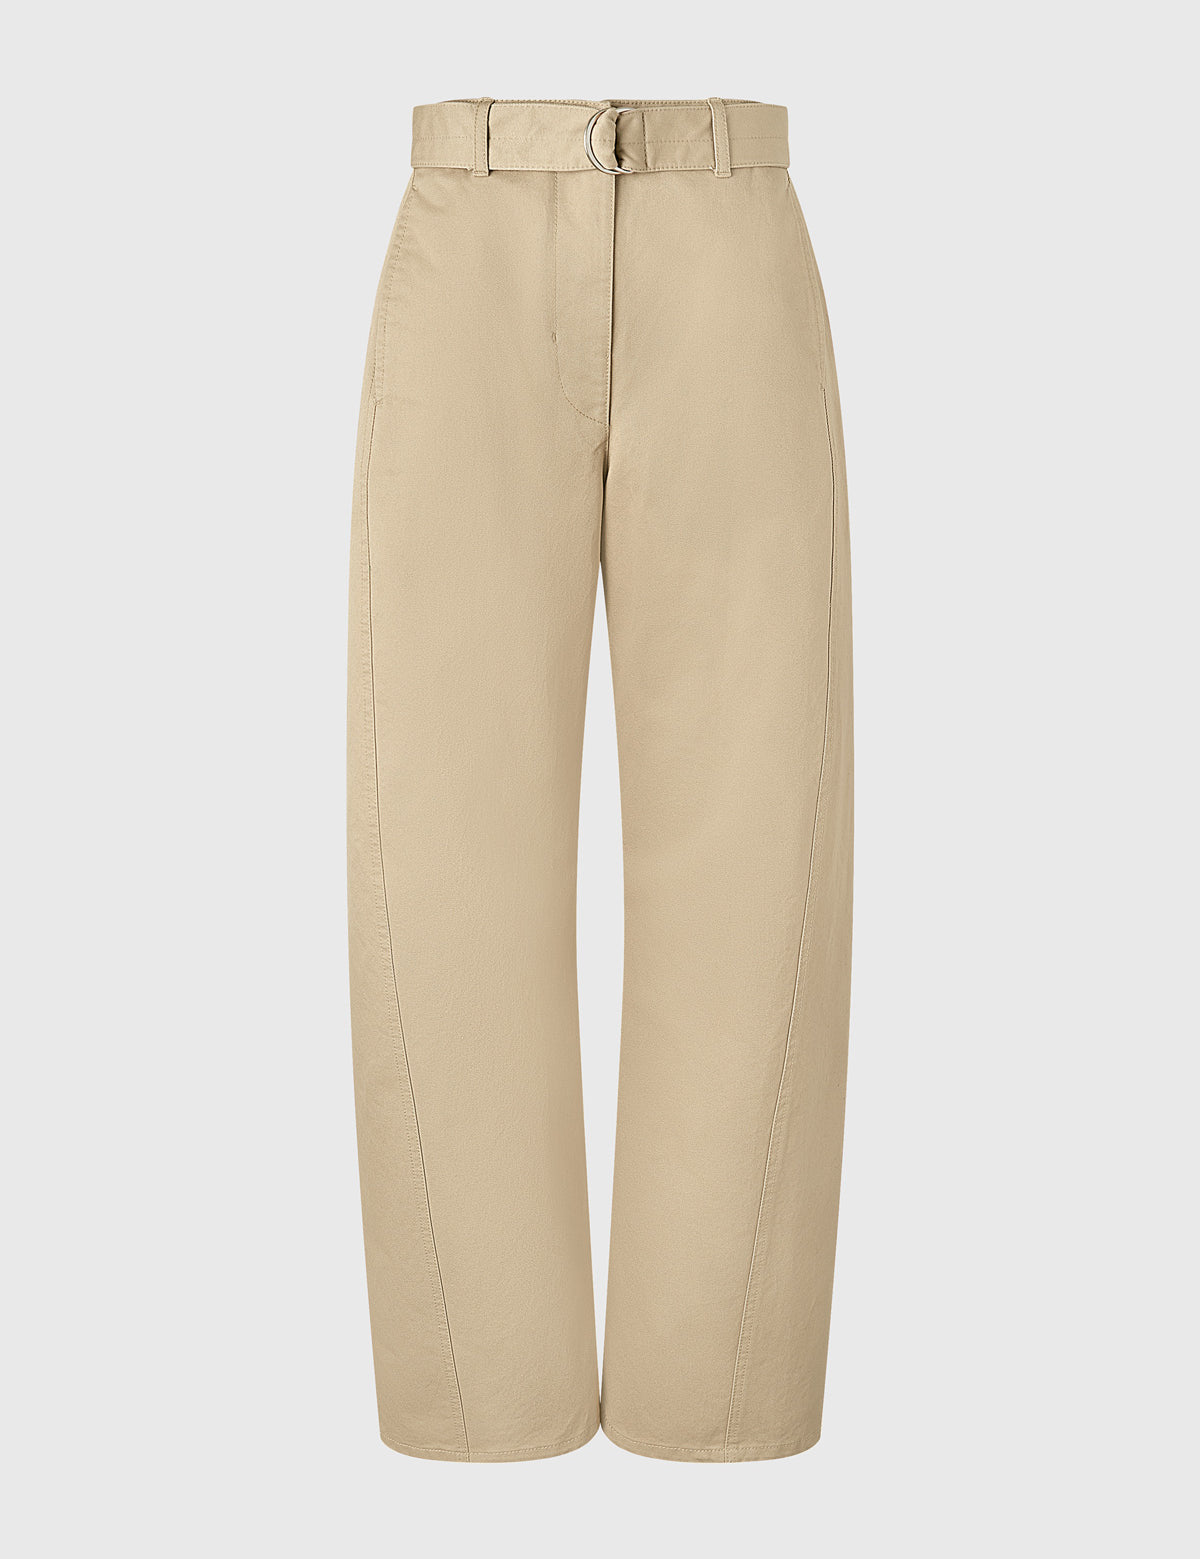 belted_cotton_pants_be_09.jpg